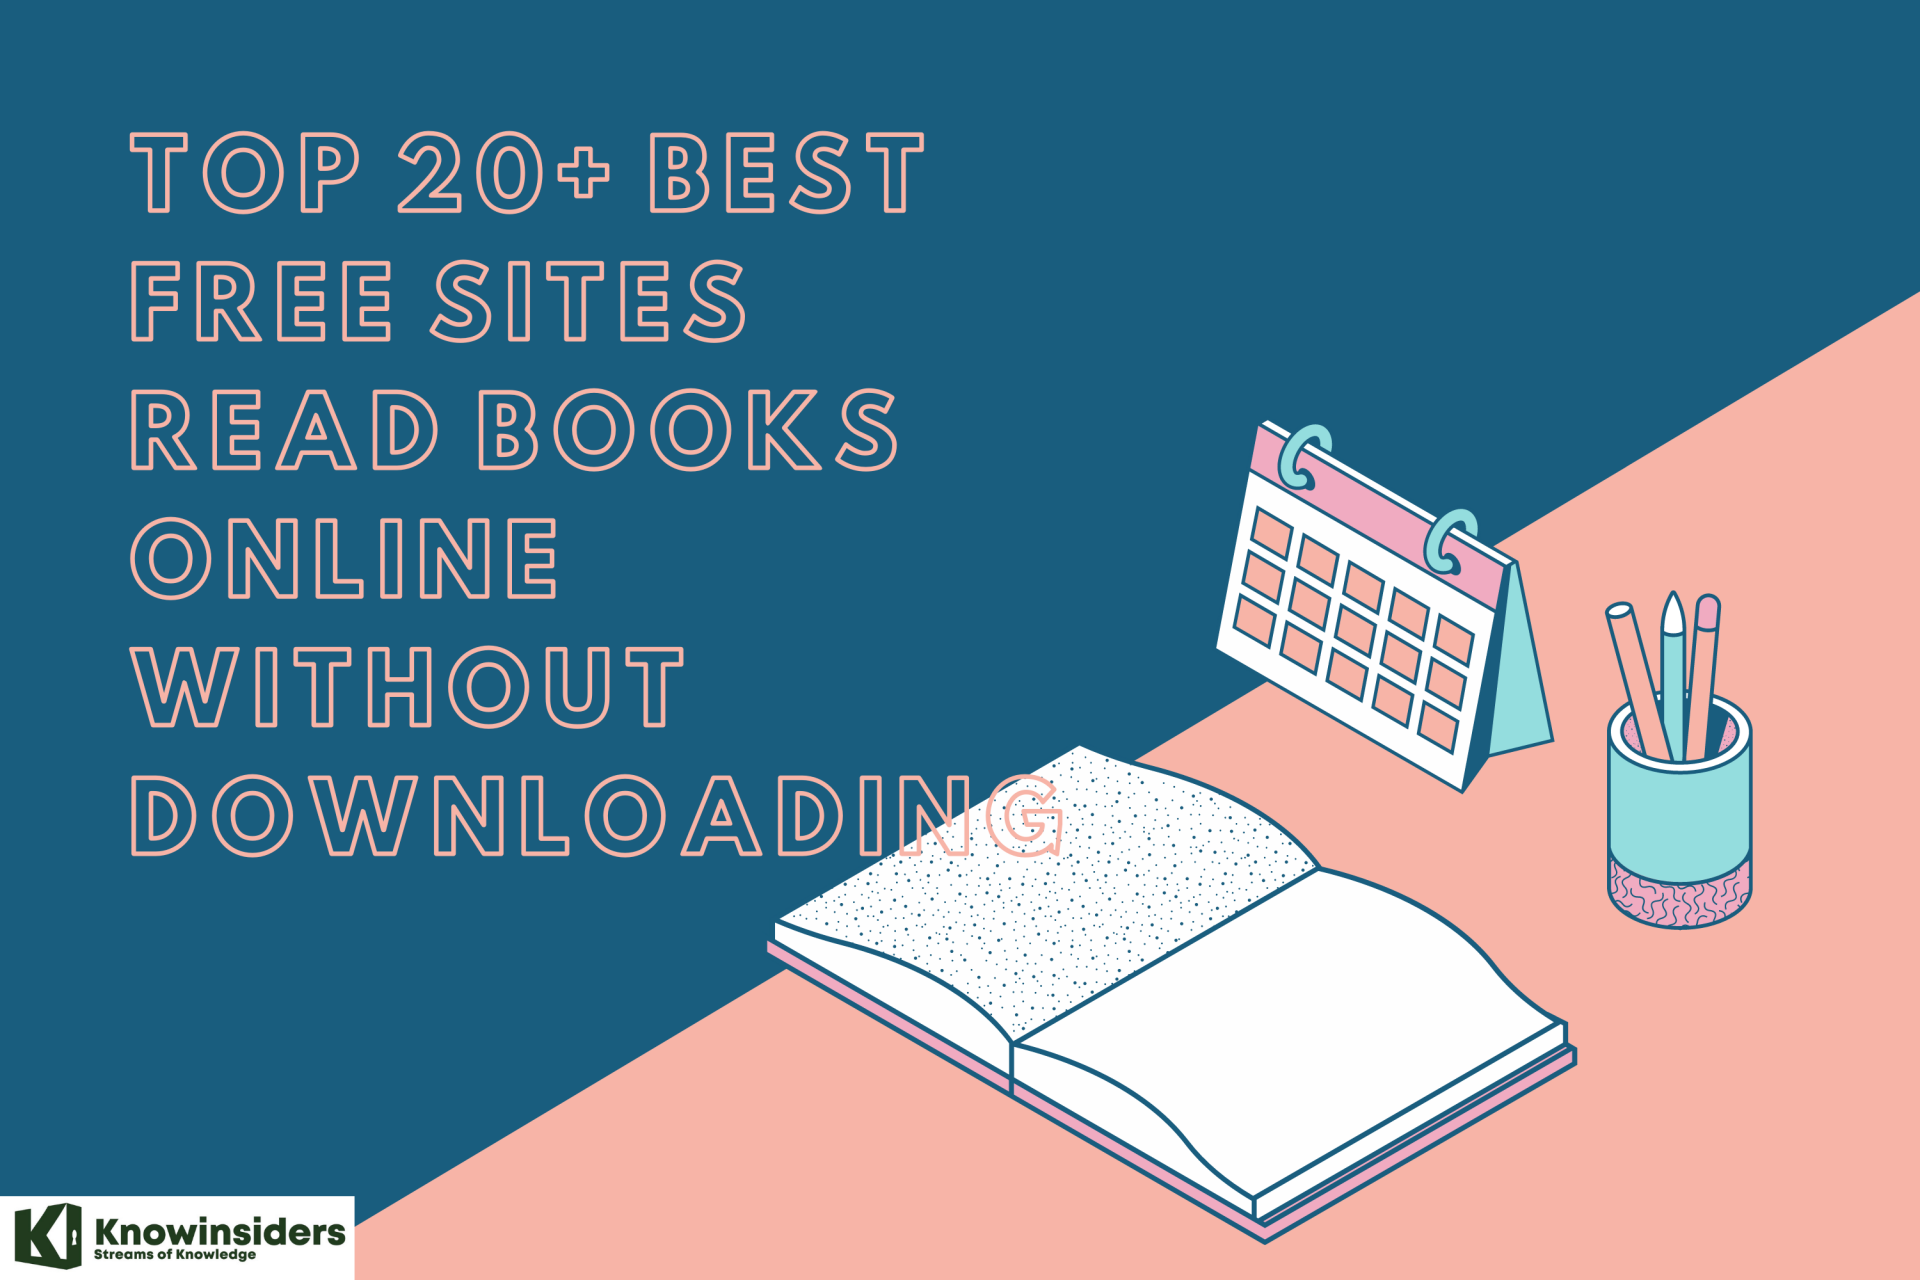 25 Best Free Sites to Read Books Online Without Downloading